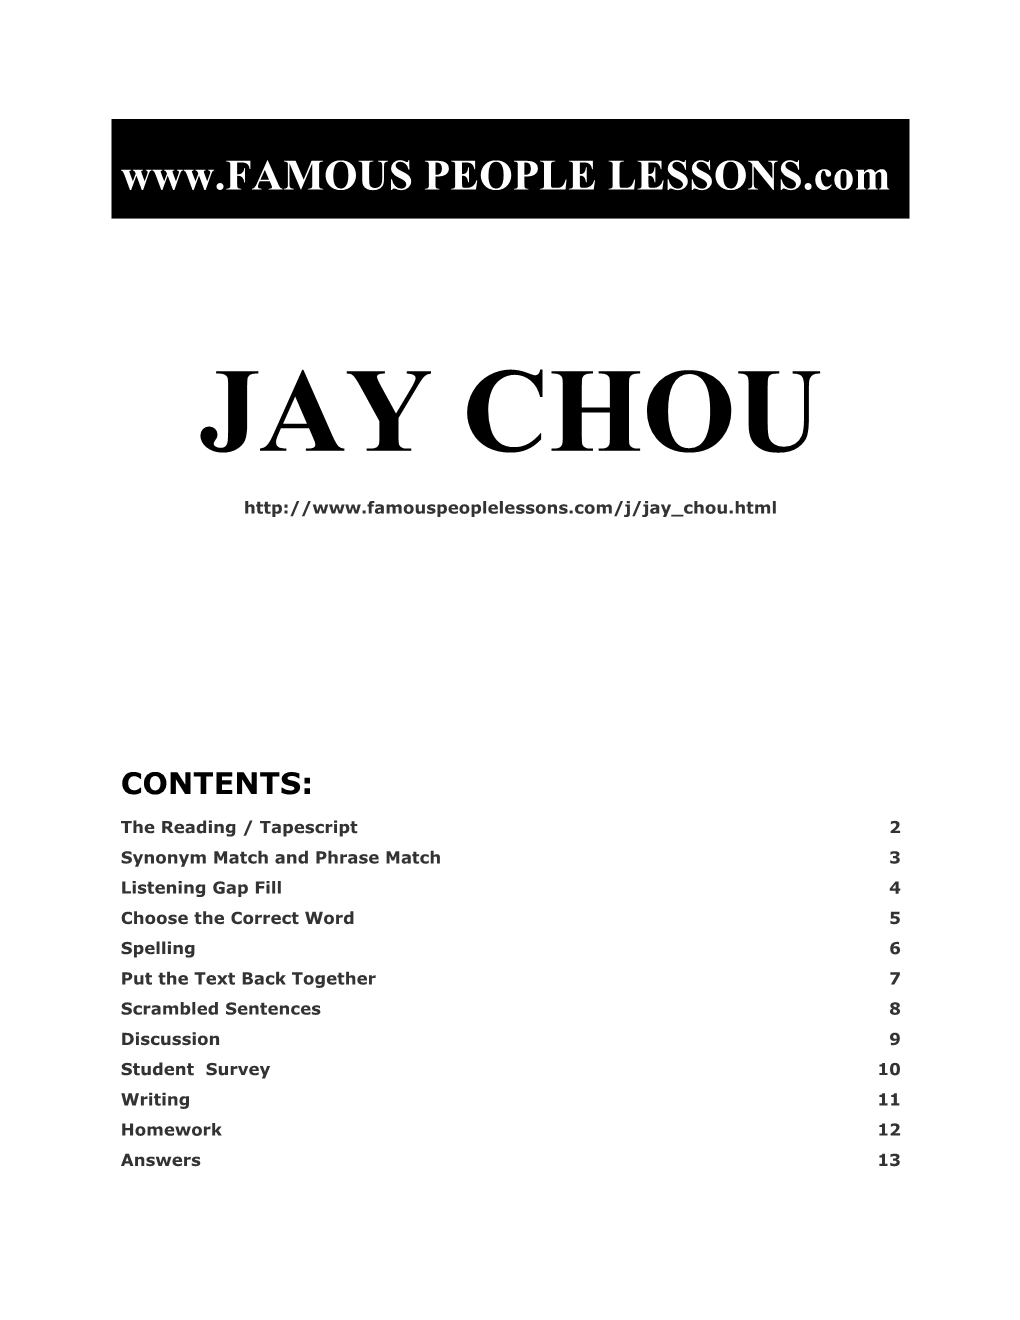 Famous People Lessons - Jay Chou